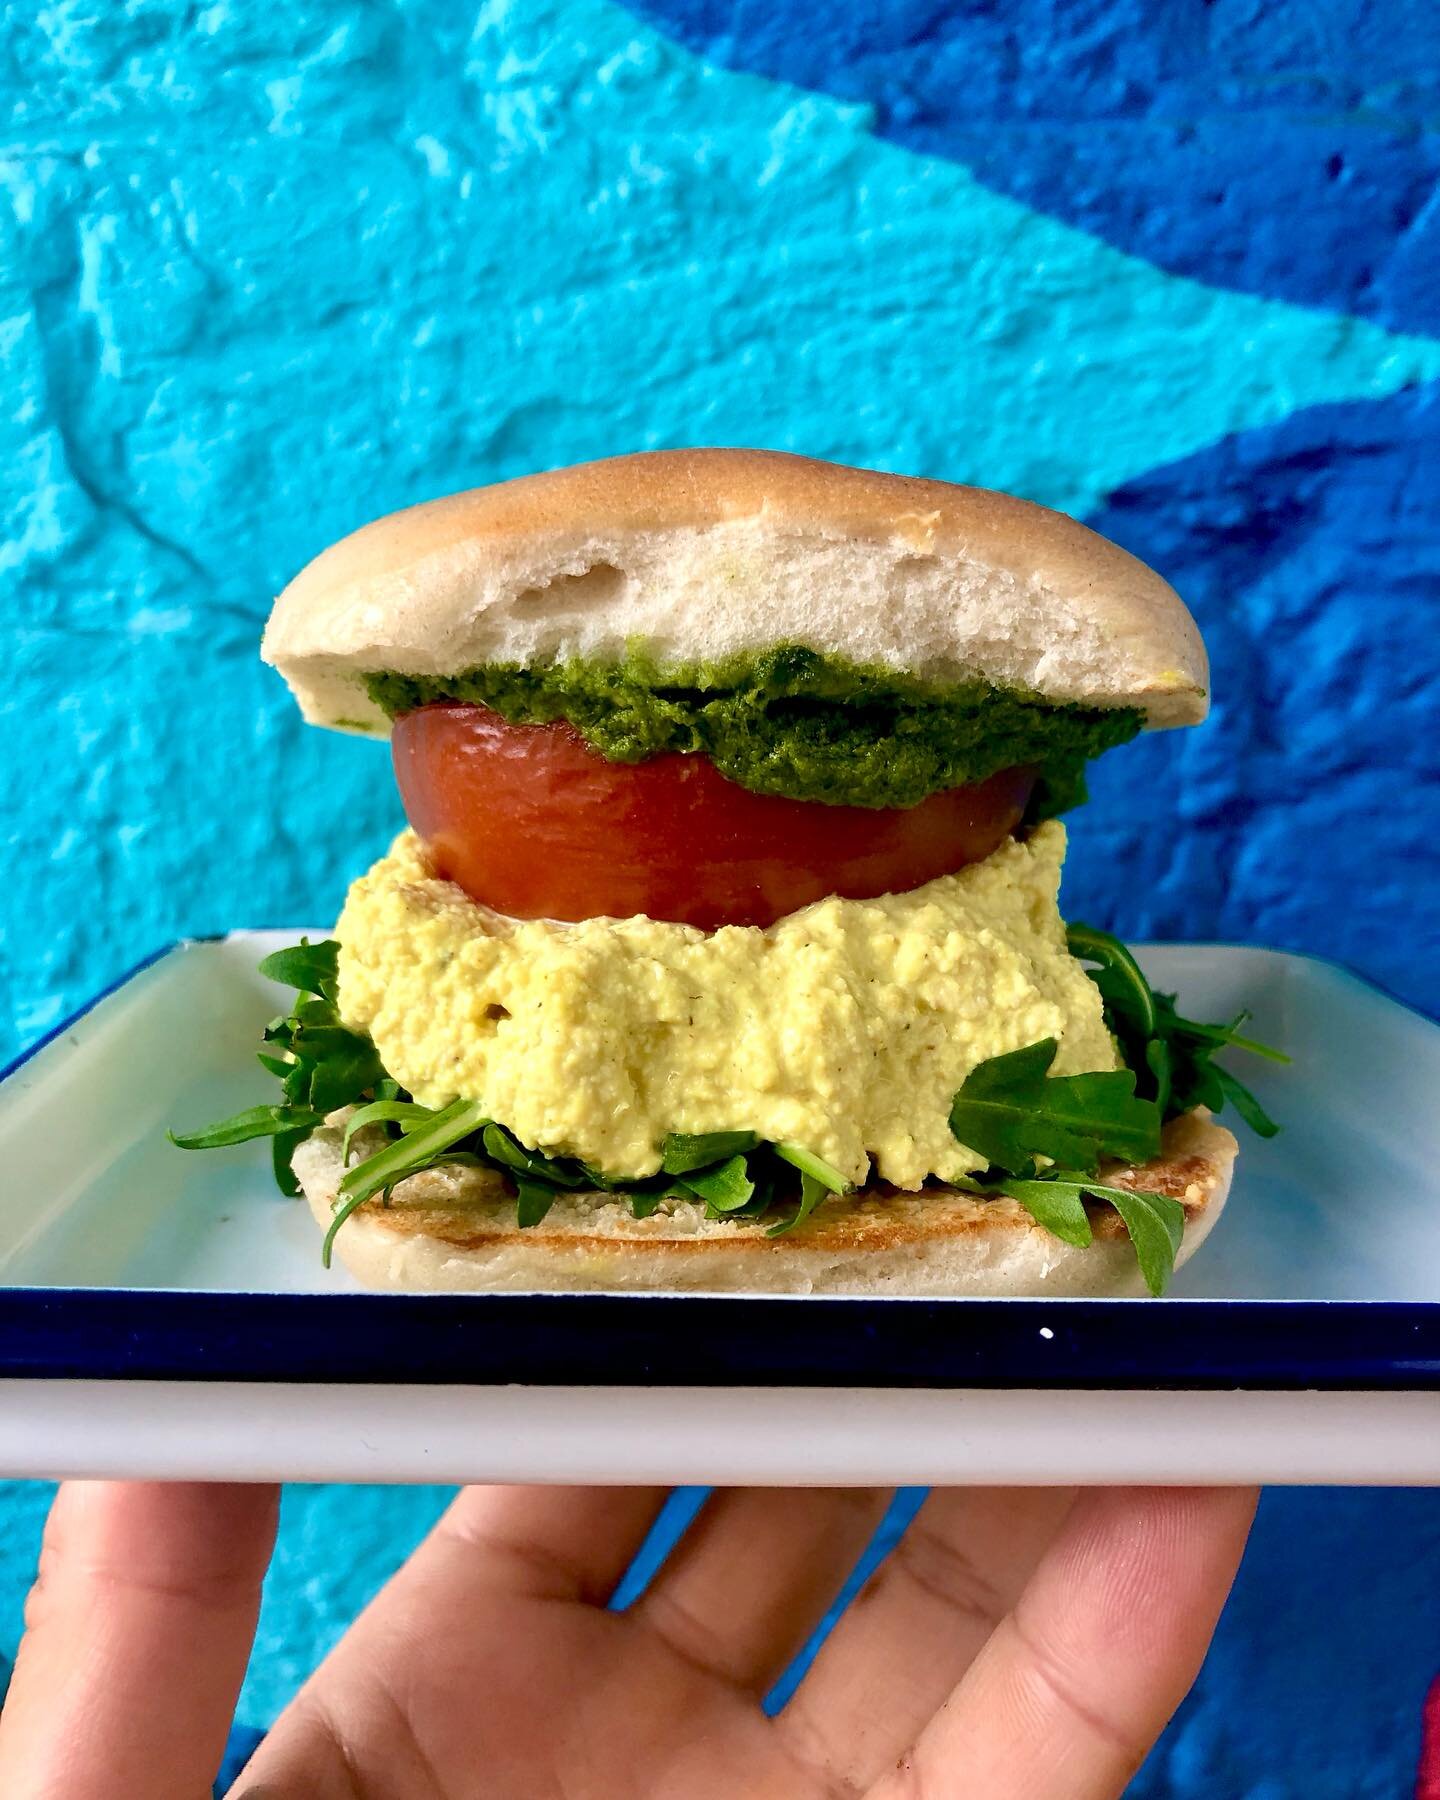 Guess who's back, back again, Chimi's back, tell your friends. 

Rosie has created a monster; 
Scrambled Tofu, Chimichurri, Roast Tomatoes, Rocket, and Paprika Butter. 

Don't be without me.